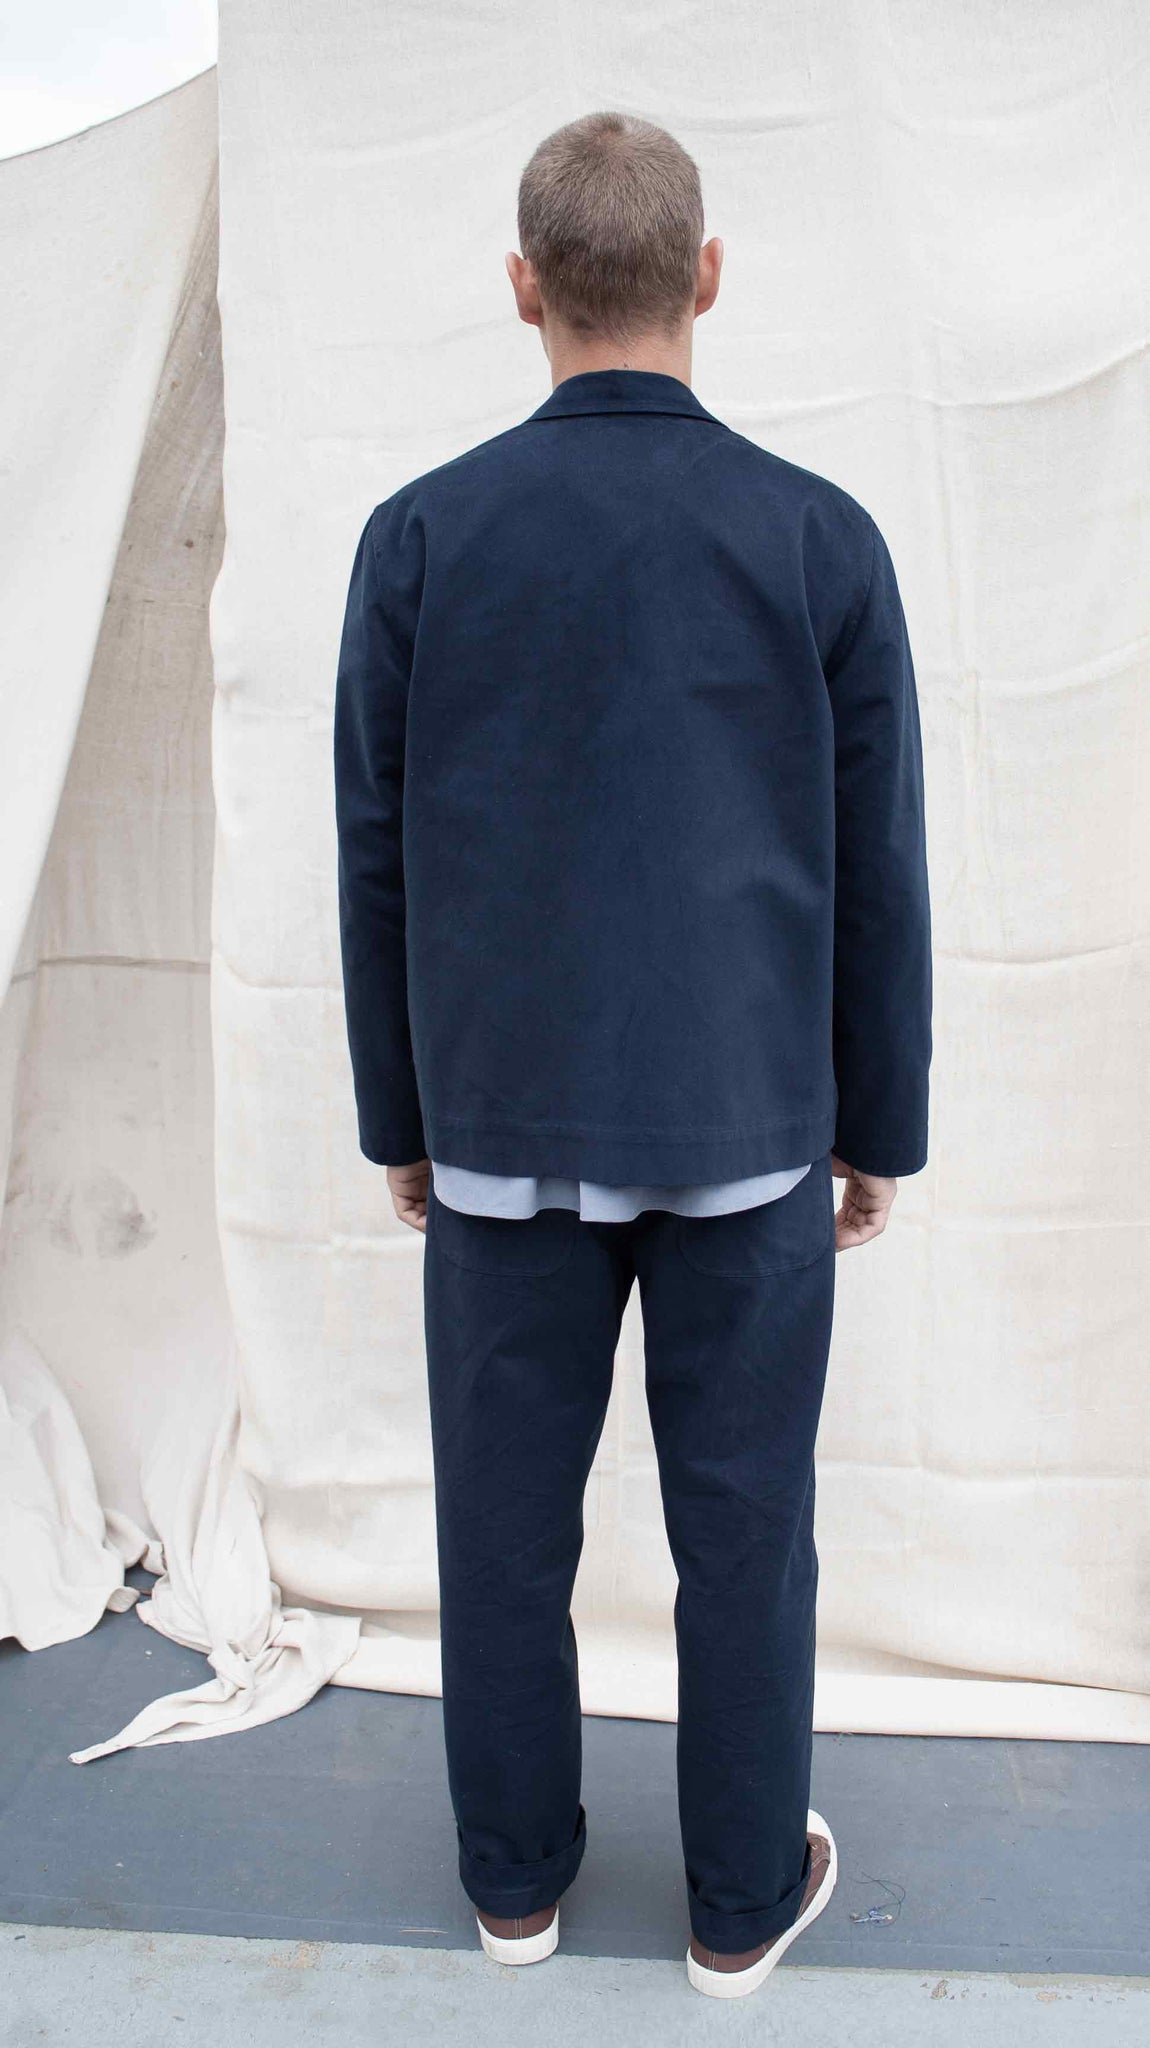 The everyday trouser brushed cotton twill  Navy